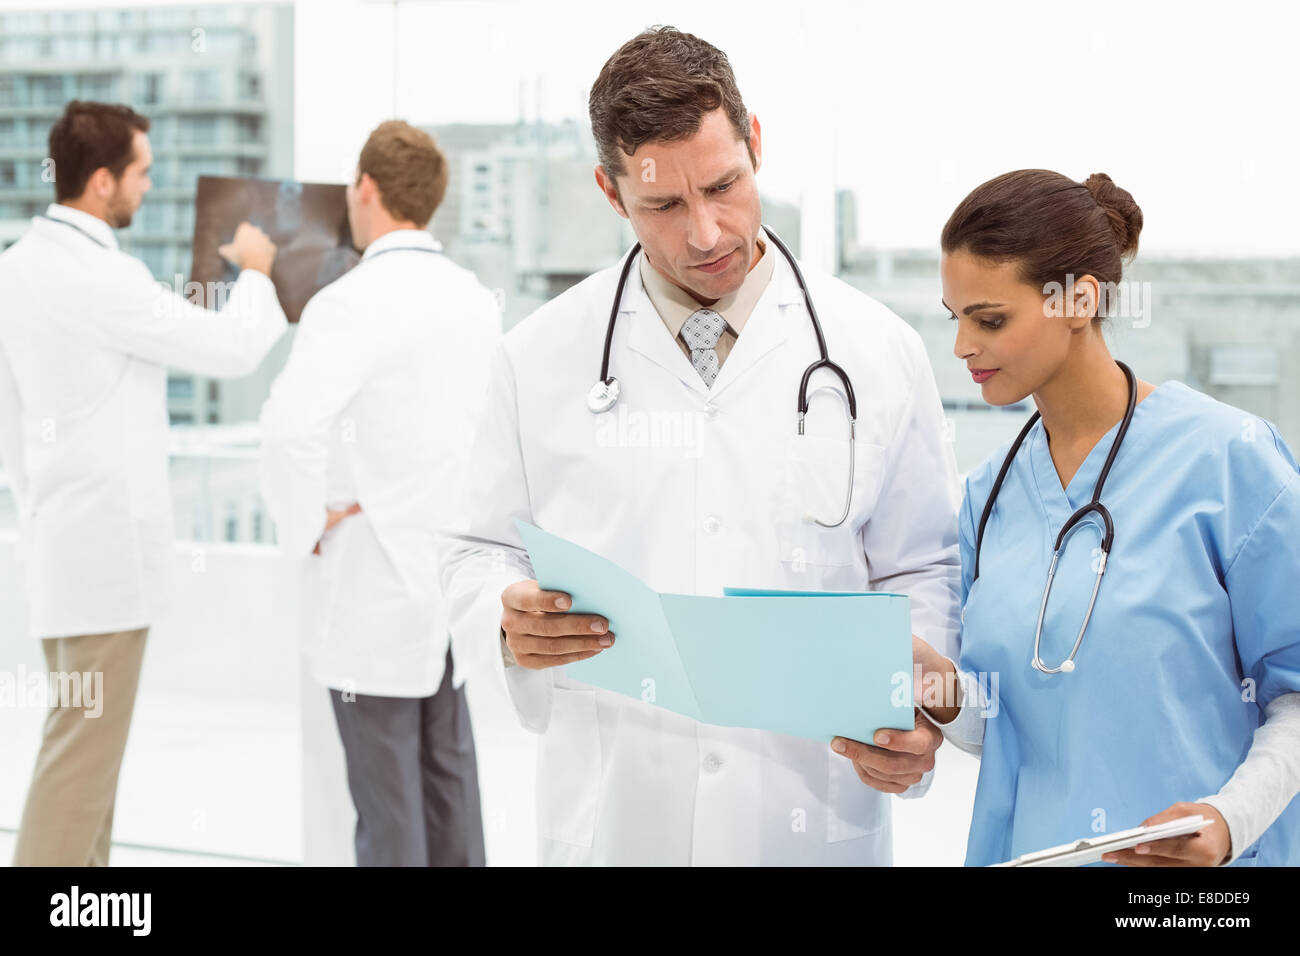 Male doctor and surgeon looking at reports Stock Photo